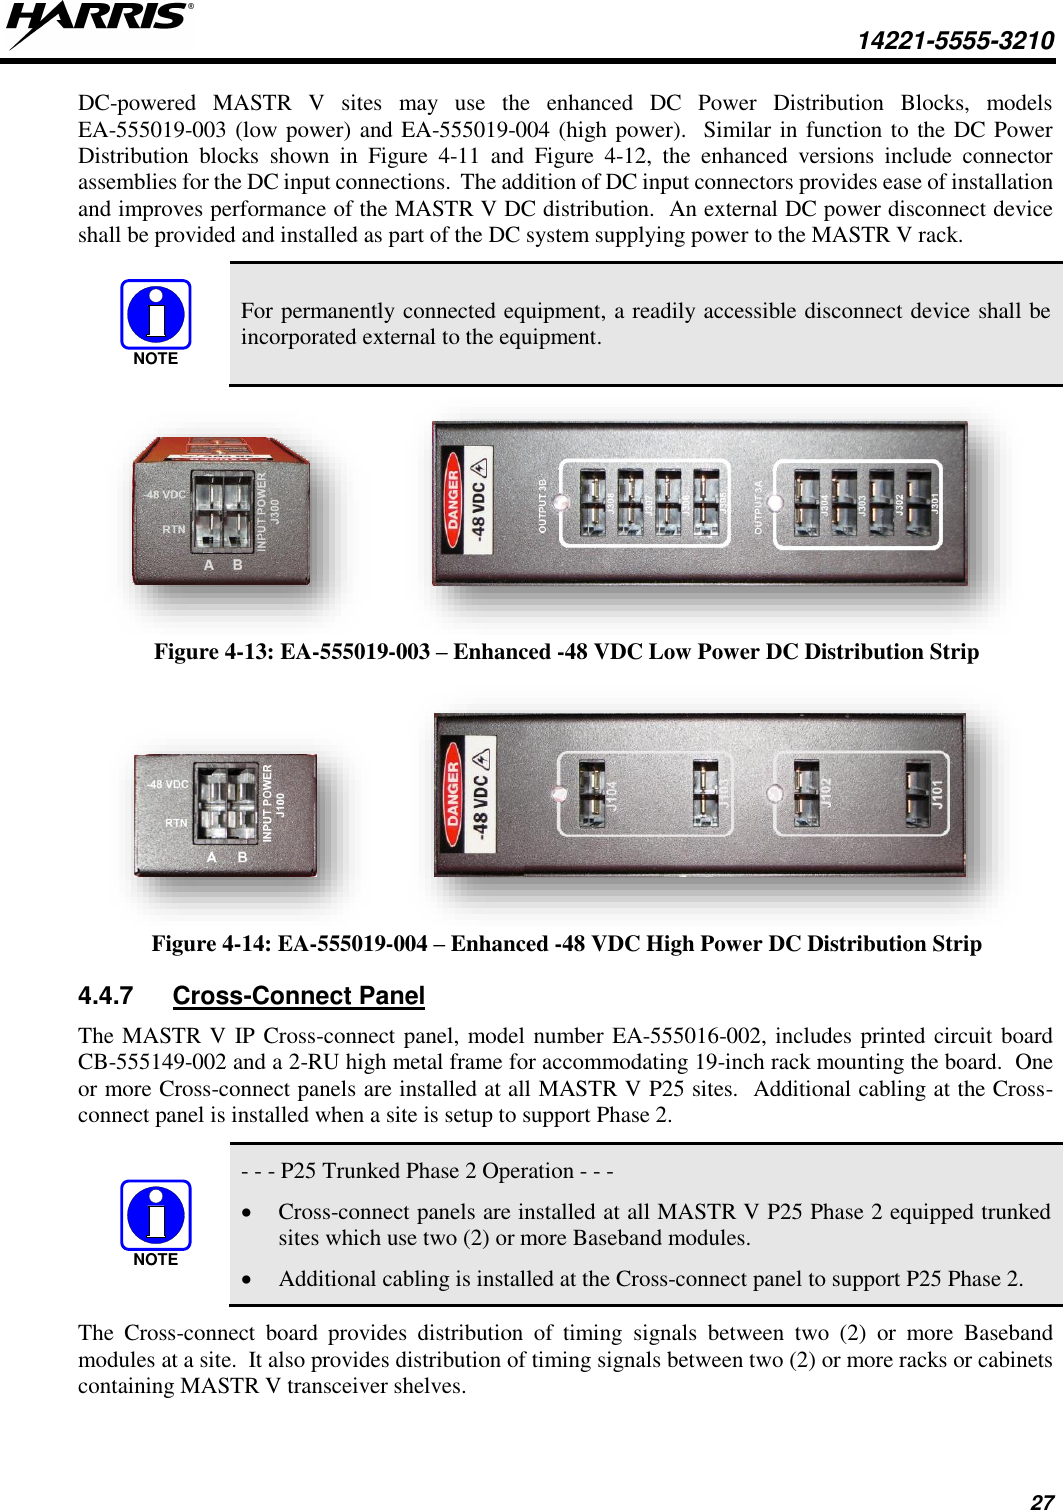  14221-5555-3210 27 DC-powered  MASTR  V  sites  may  use  the  enhanced  DC  Power  Distribution  Blocks,  models EA-555019-003 (low power) and EA-555019-004 (high power).  Similar in function to the DC Power Distribution  blocks  shown  in  Figure  4-11  and  Figure  4-12,  the  enhanced  versions  include  connector assemblies for the DC input connections.  The addition of DC input connectors provides ease of installation and improves performance of the MASTR V DC distribution.  An external DC power disconnect device shall be provided and installed as part of the DC system supplying power to the MASTR V rack.  For permanently connected equipment, a readily accessible disconnect device shall be incorporated external to the equipment.    Figure 4-13: EA-555019-003 – Enhanced -48 VDC Low Power DC Distribution Strip     Figure 4-14: EA-555019-004 – Enhanced -48 VDC High Power DC Distribution Strip 4.4.7  Cross-Connect Panel The MASTR V IP Cross-connect panel, model number EA-555016-002, includes printed circuit board CB-555149-002 and a 2-RU high metal frame for accommodating 19-inch rack mounting the board.  One or more Cross-connect panels are installed at all MASTR V P25 sites.  Additional cabling at the Cross-connect panel is installed when a site is setup to support Phase 2.     - - - P25 Trunked Phase 2 Operation - - - • Cross-connect panels are installed at all MASTR V P25 Phase 2 equipped trunked sites which use two (2) or more Baseband modules. • Additional cabling is installed at the Cross-connect panel to support P25 Phase 2. The  Cross-connect  board  provides  distribution  of  timing  signals  between  two  (2)  or  more  Baseband modules at a site.  It also provides distribution of timing signals between two (2) or more racks or cabinets containing MASTR V transceiver shelves.   NOTENOTE